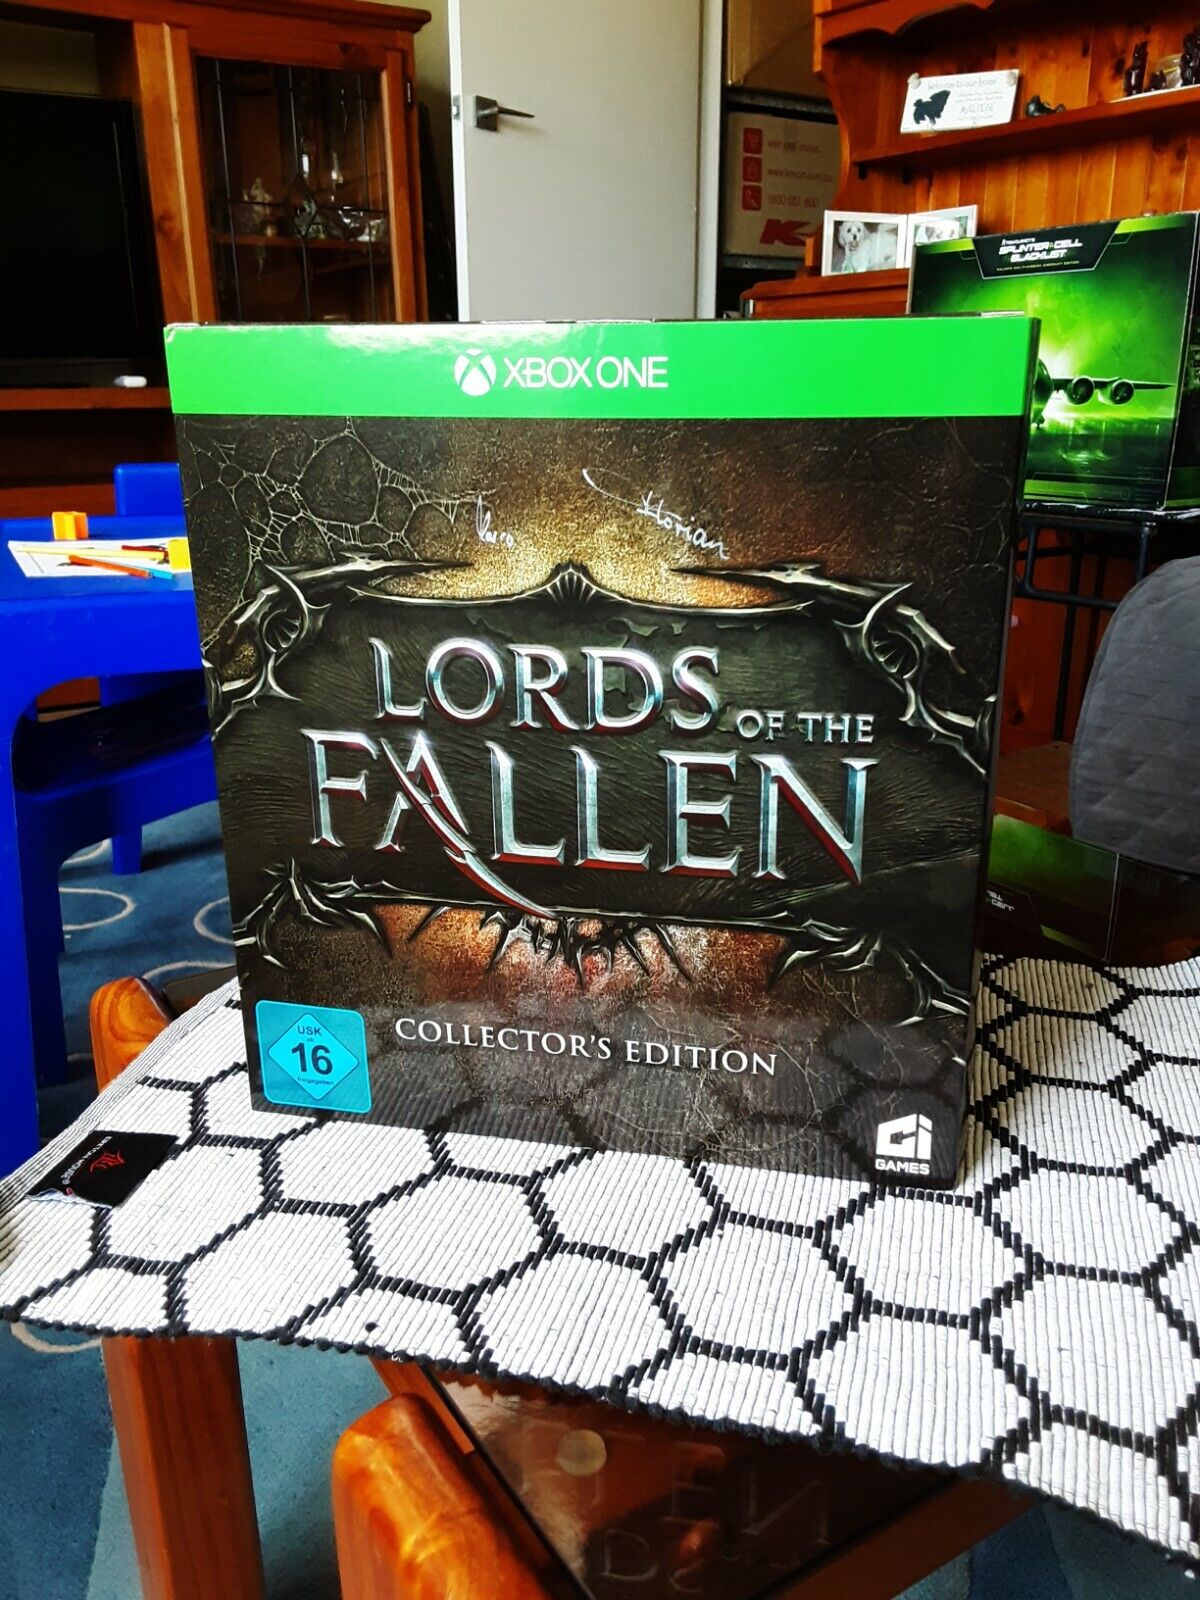 Lords of the fallen Collector's Edition Xbox one